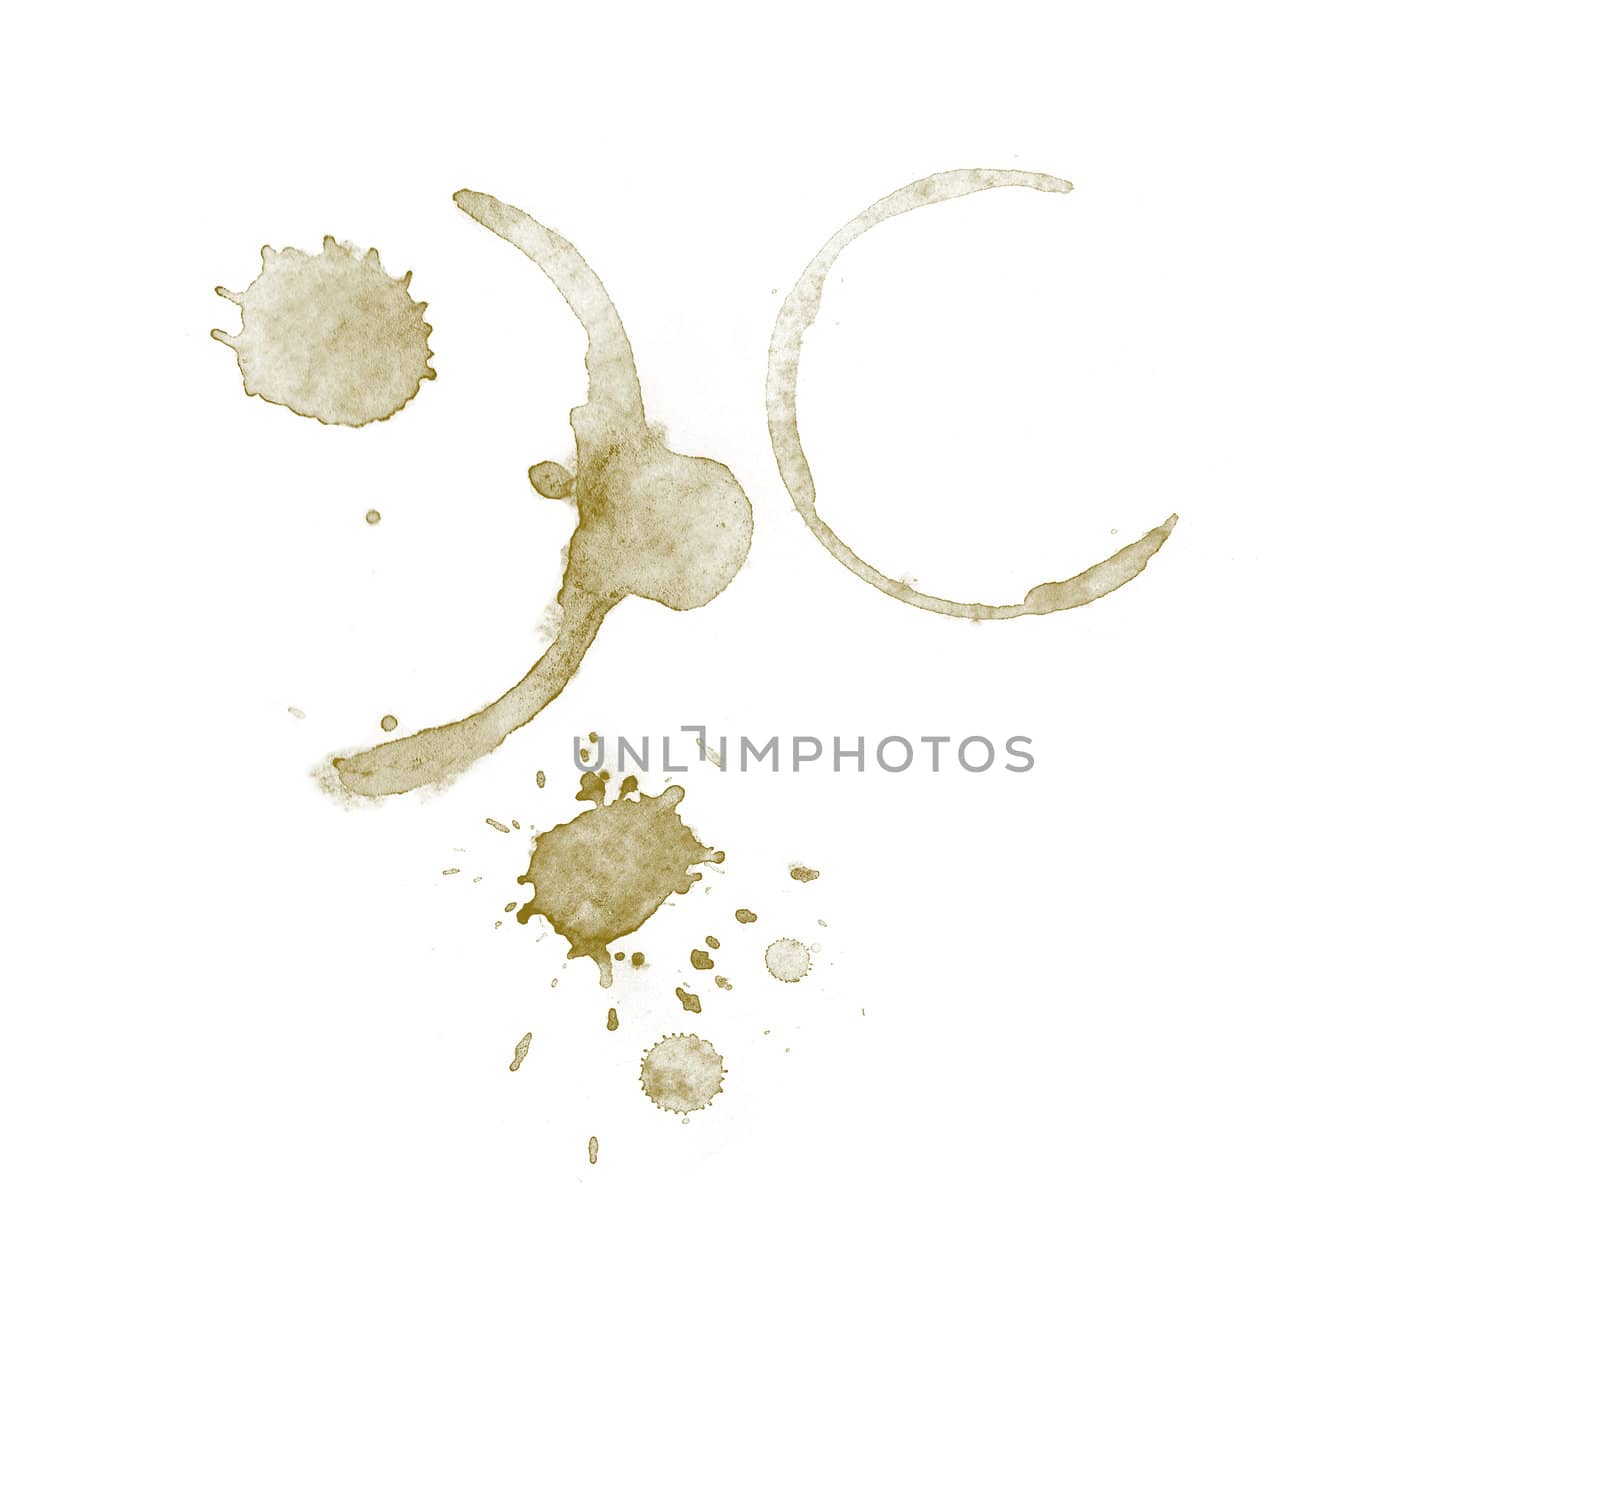 Coffee Stain by sacatani